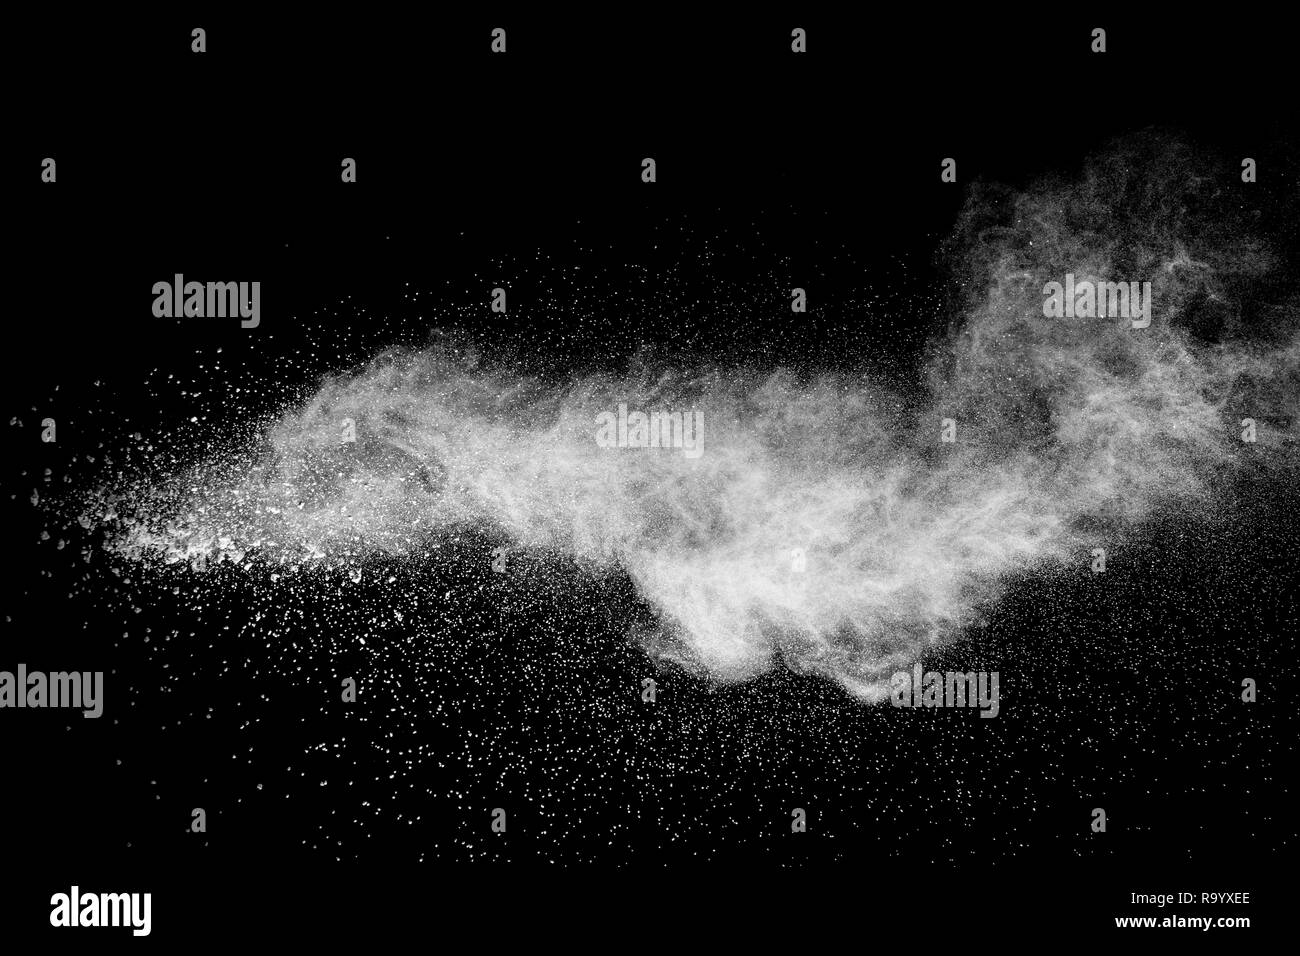 Bizarre forms of  white powder explosion on white background.Launched white dust particles splash on dark background. Stock Photo